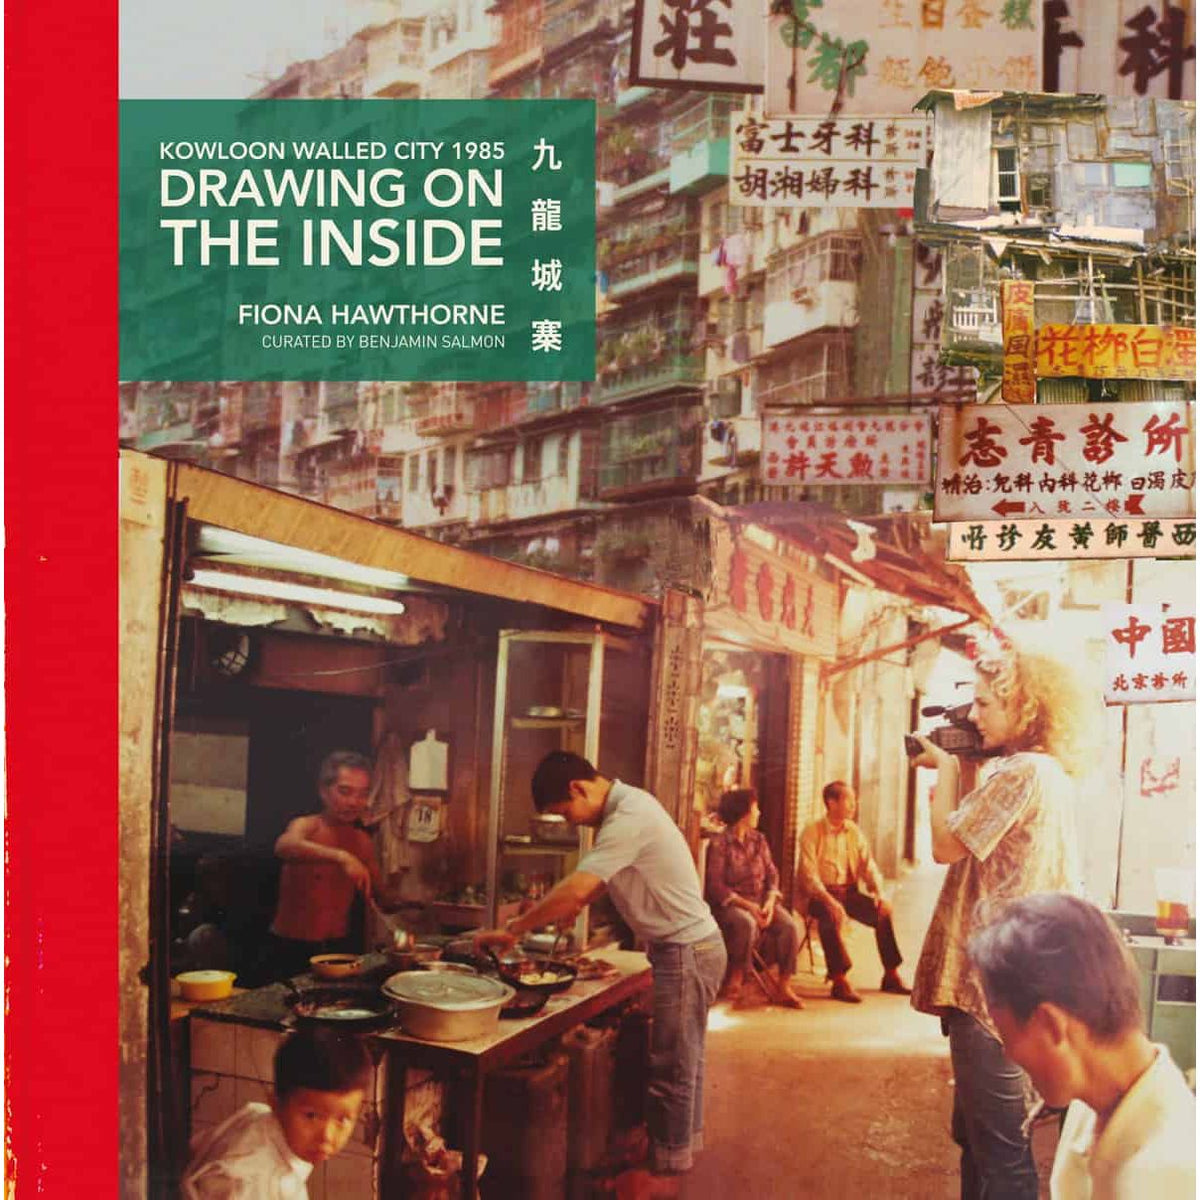 BOOK: Drawing on the Inside: Kowloon Walled City 1985